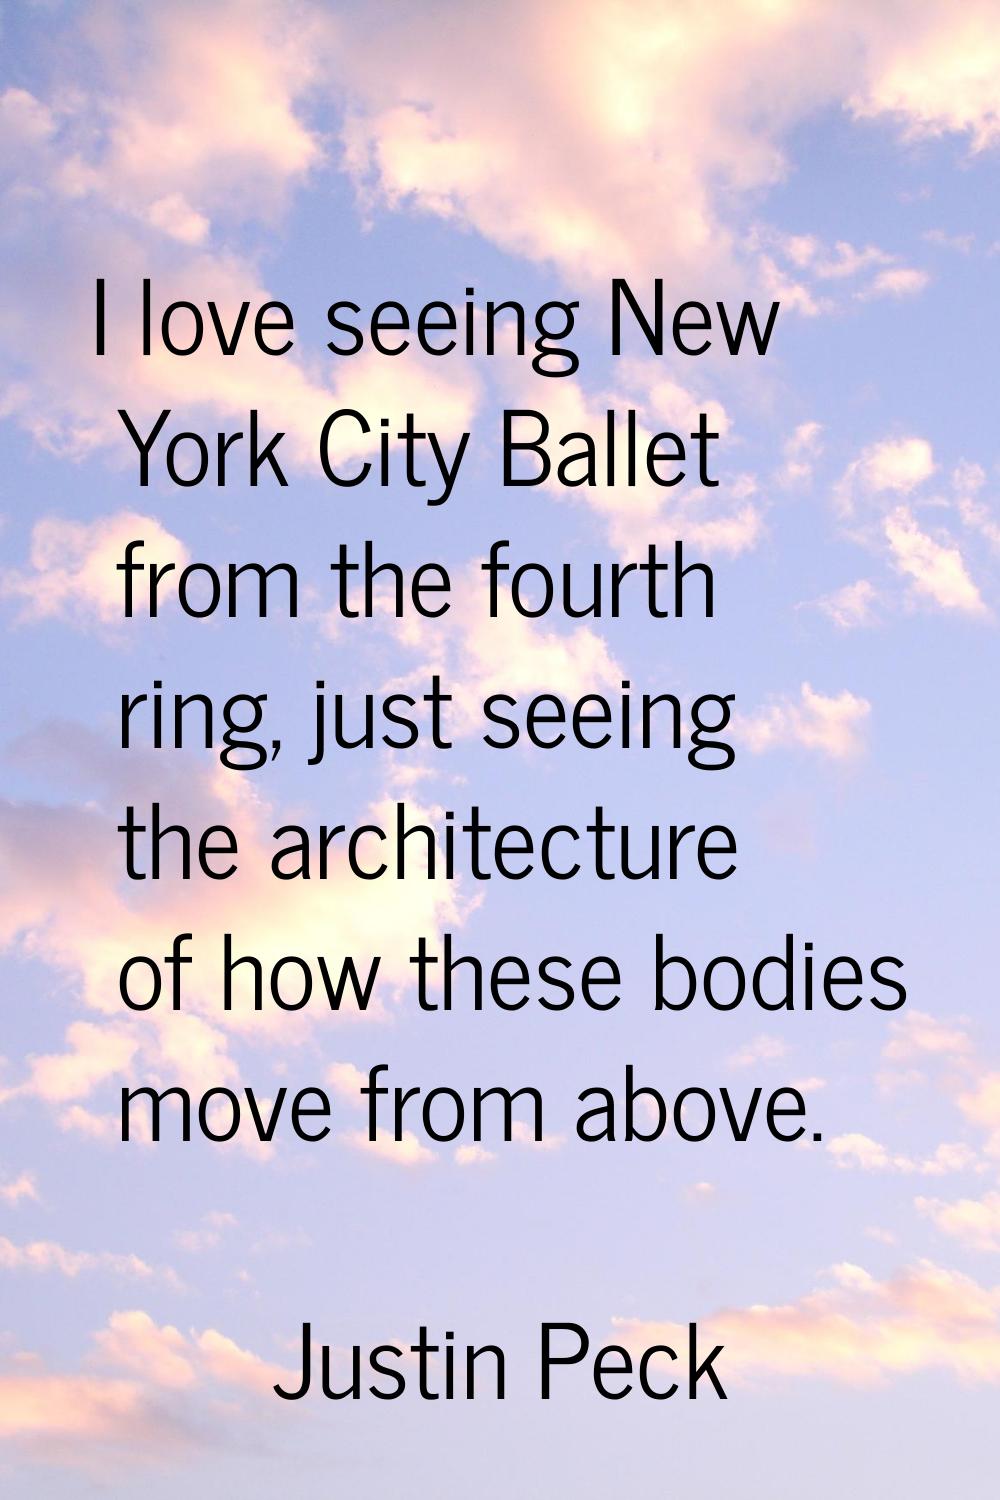 I love seeing New York City Ballet from the fourth ring, just seeing the architecture of how these 